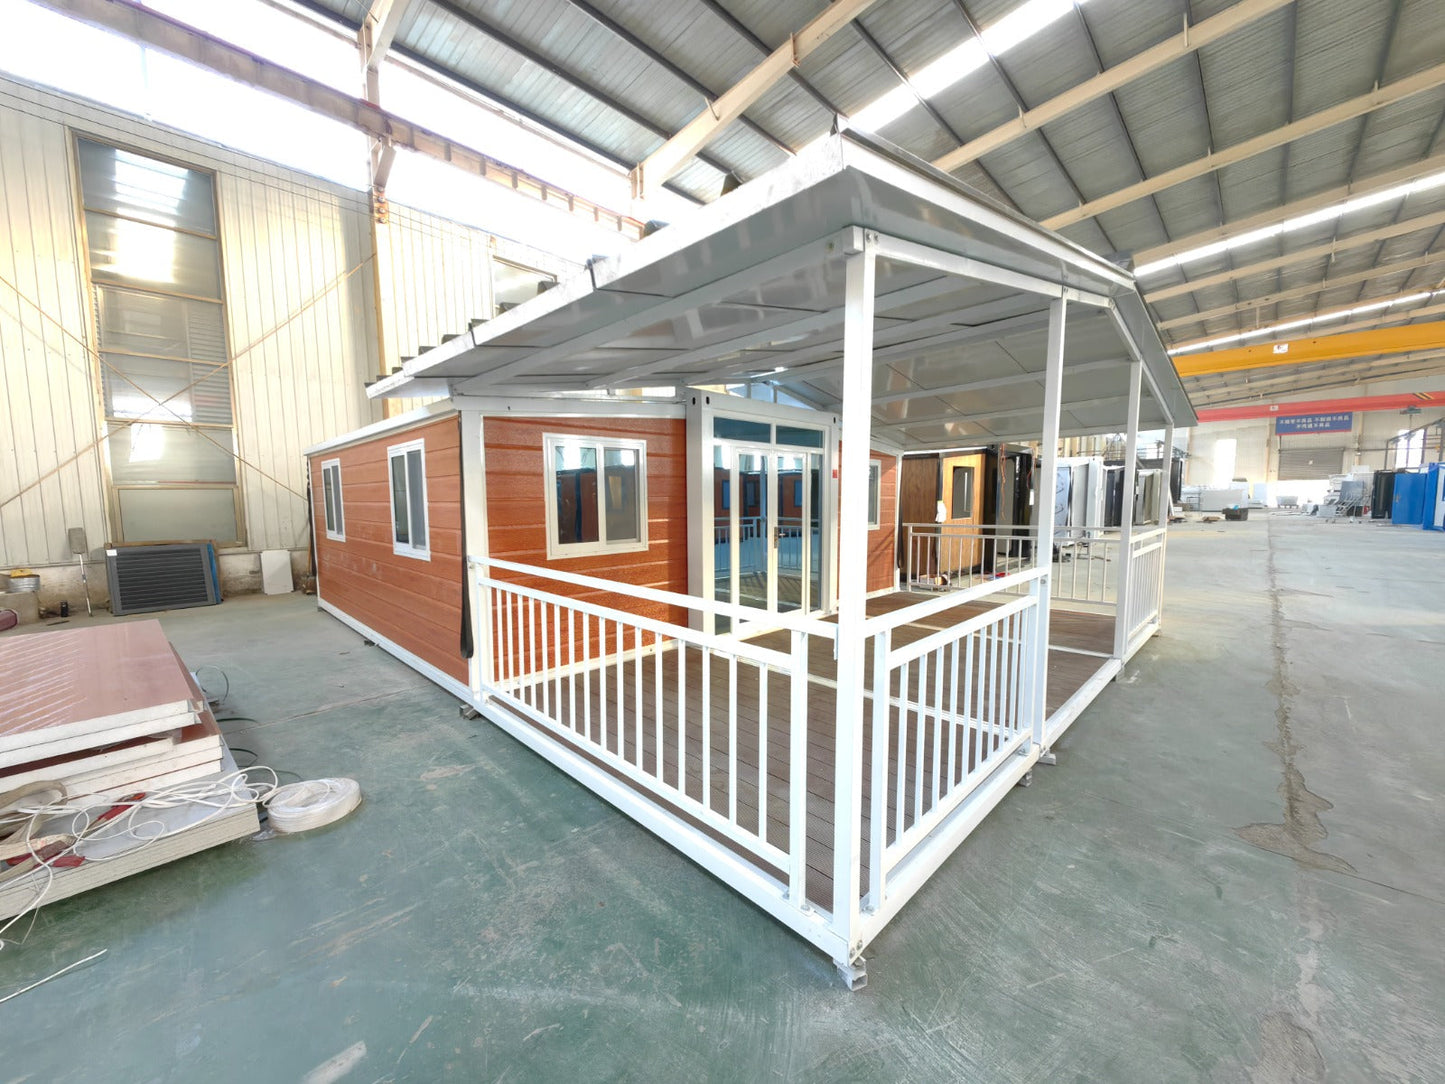 20ft Premium W/ Covered Porch & Pitched Roof